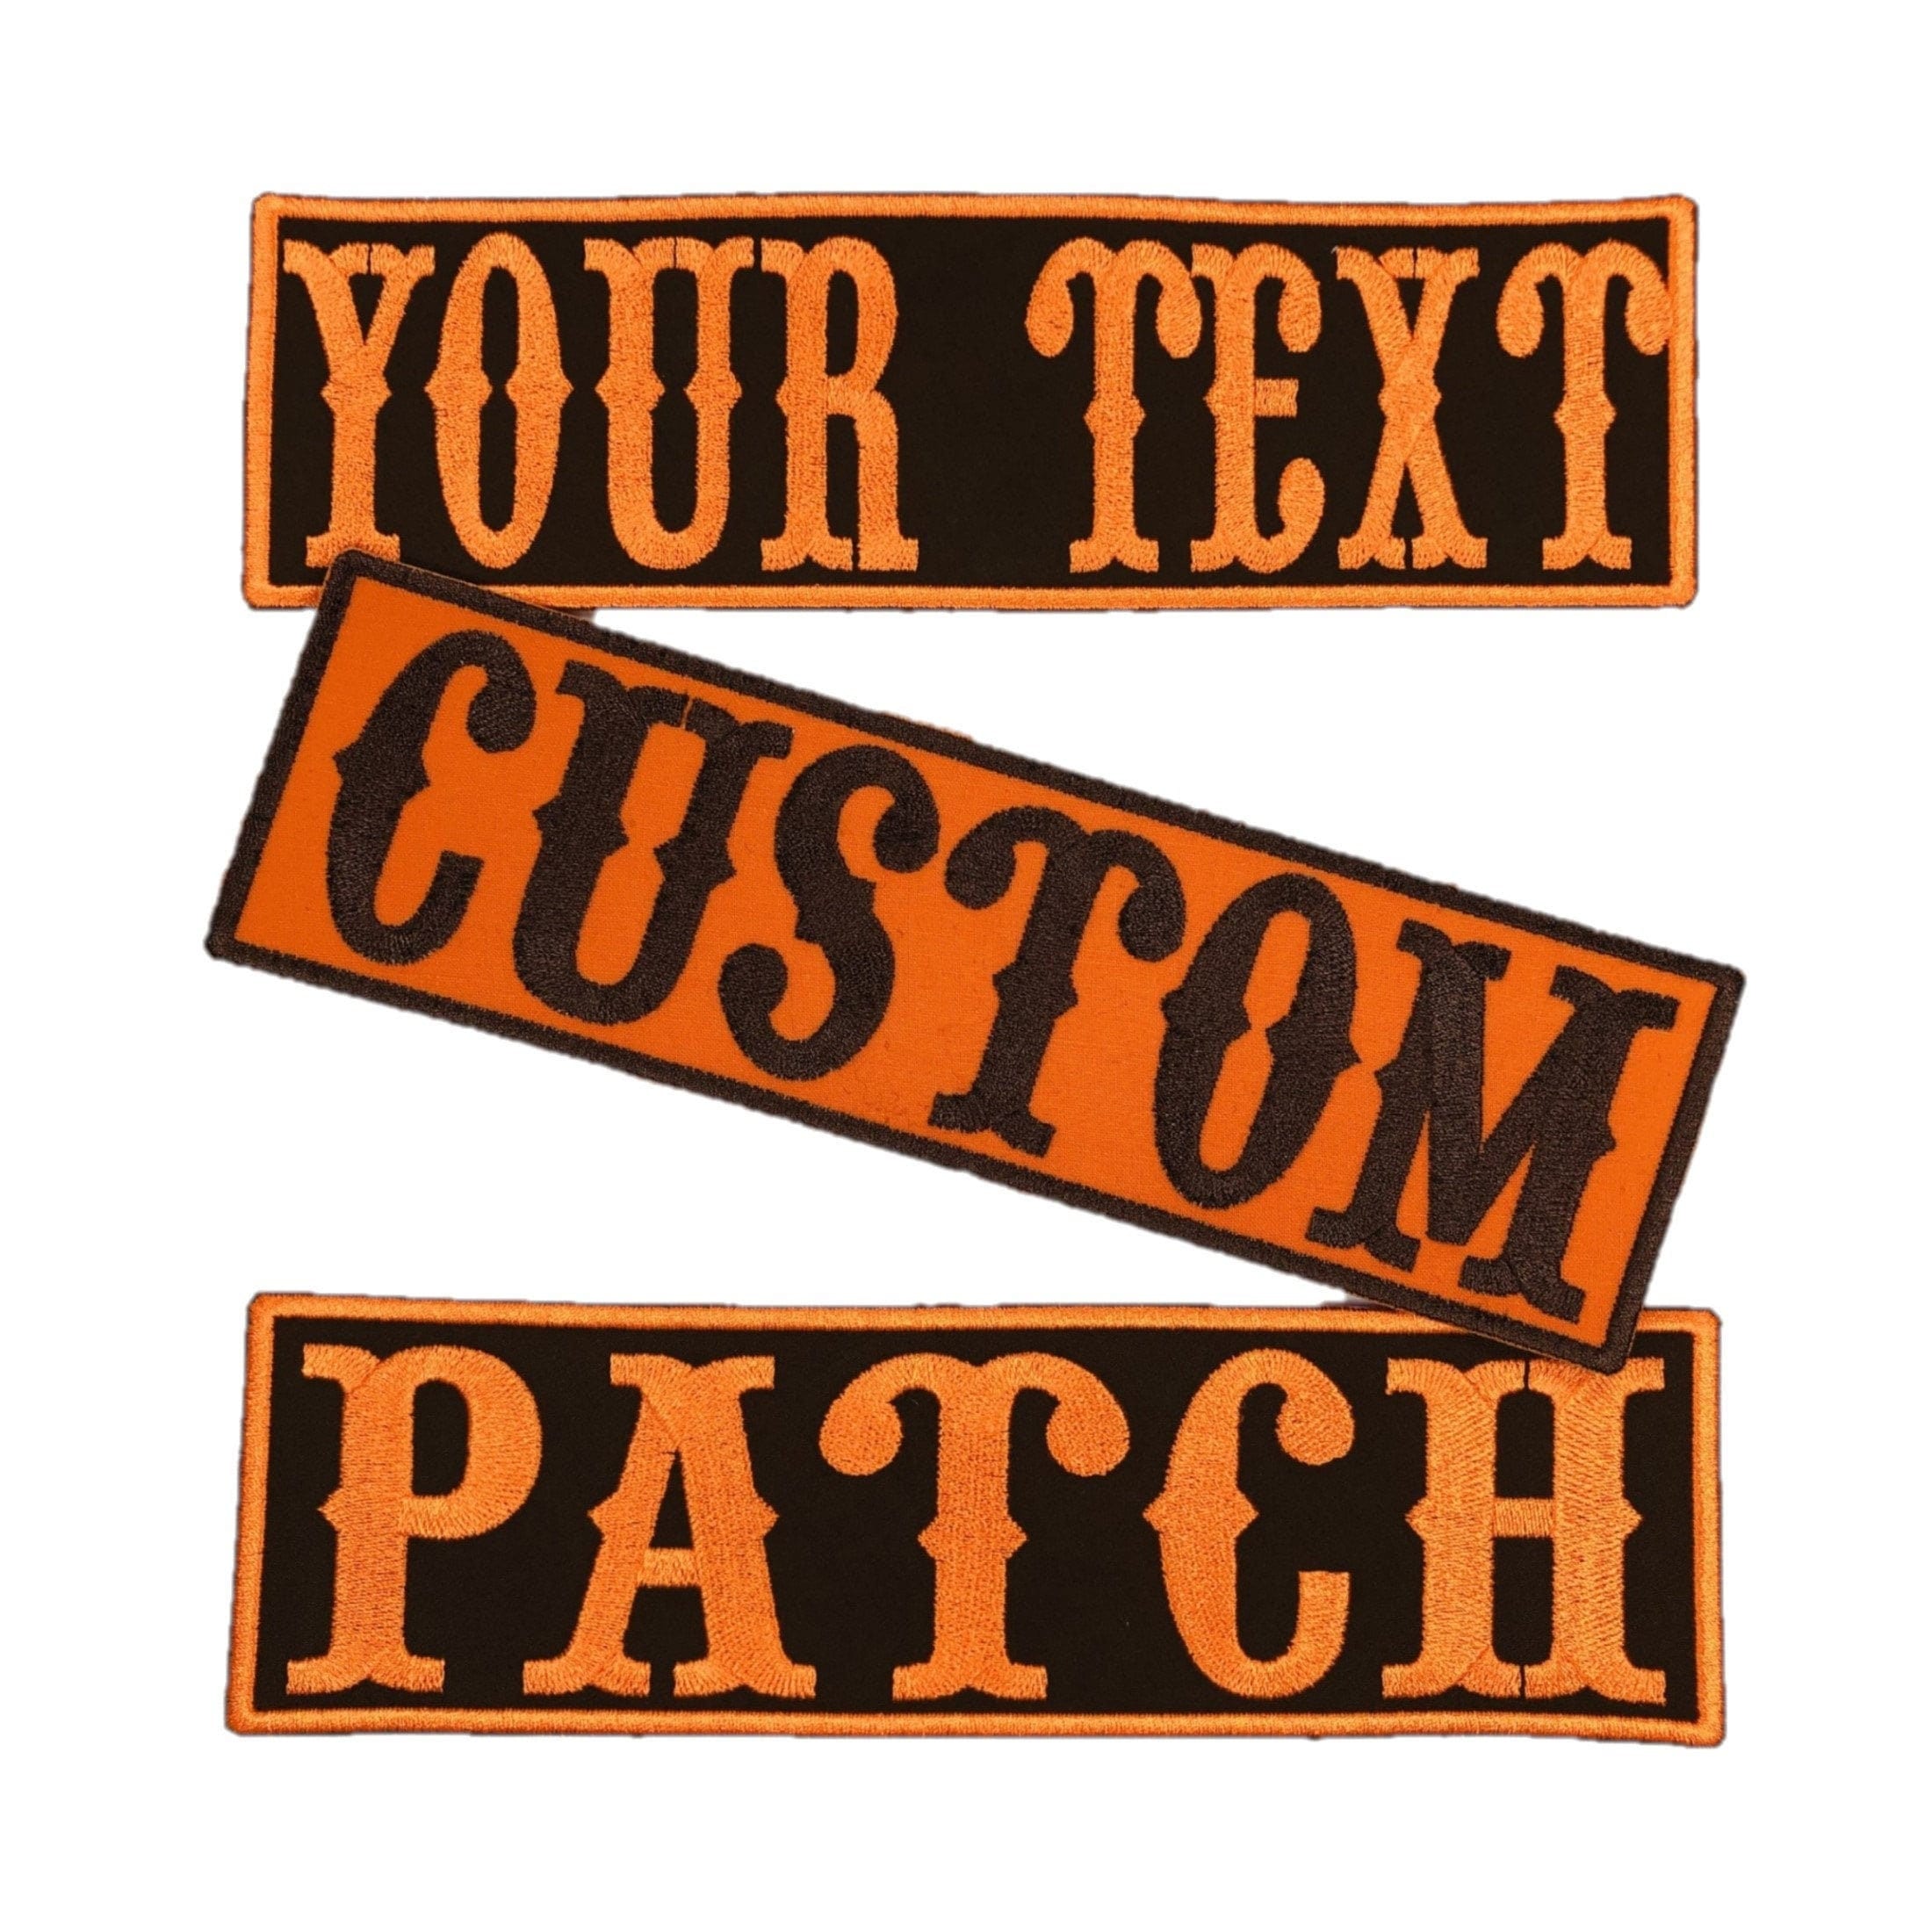 11 Custom Iron on Patches for Jackets Motorcycle Rocker Patches